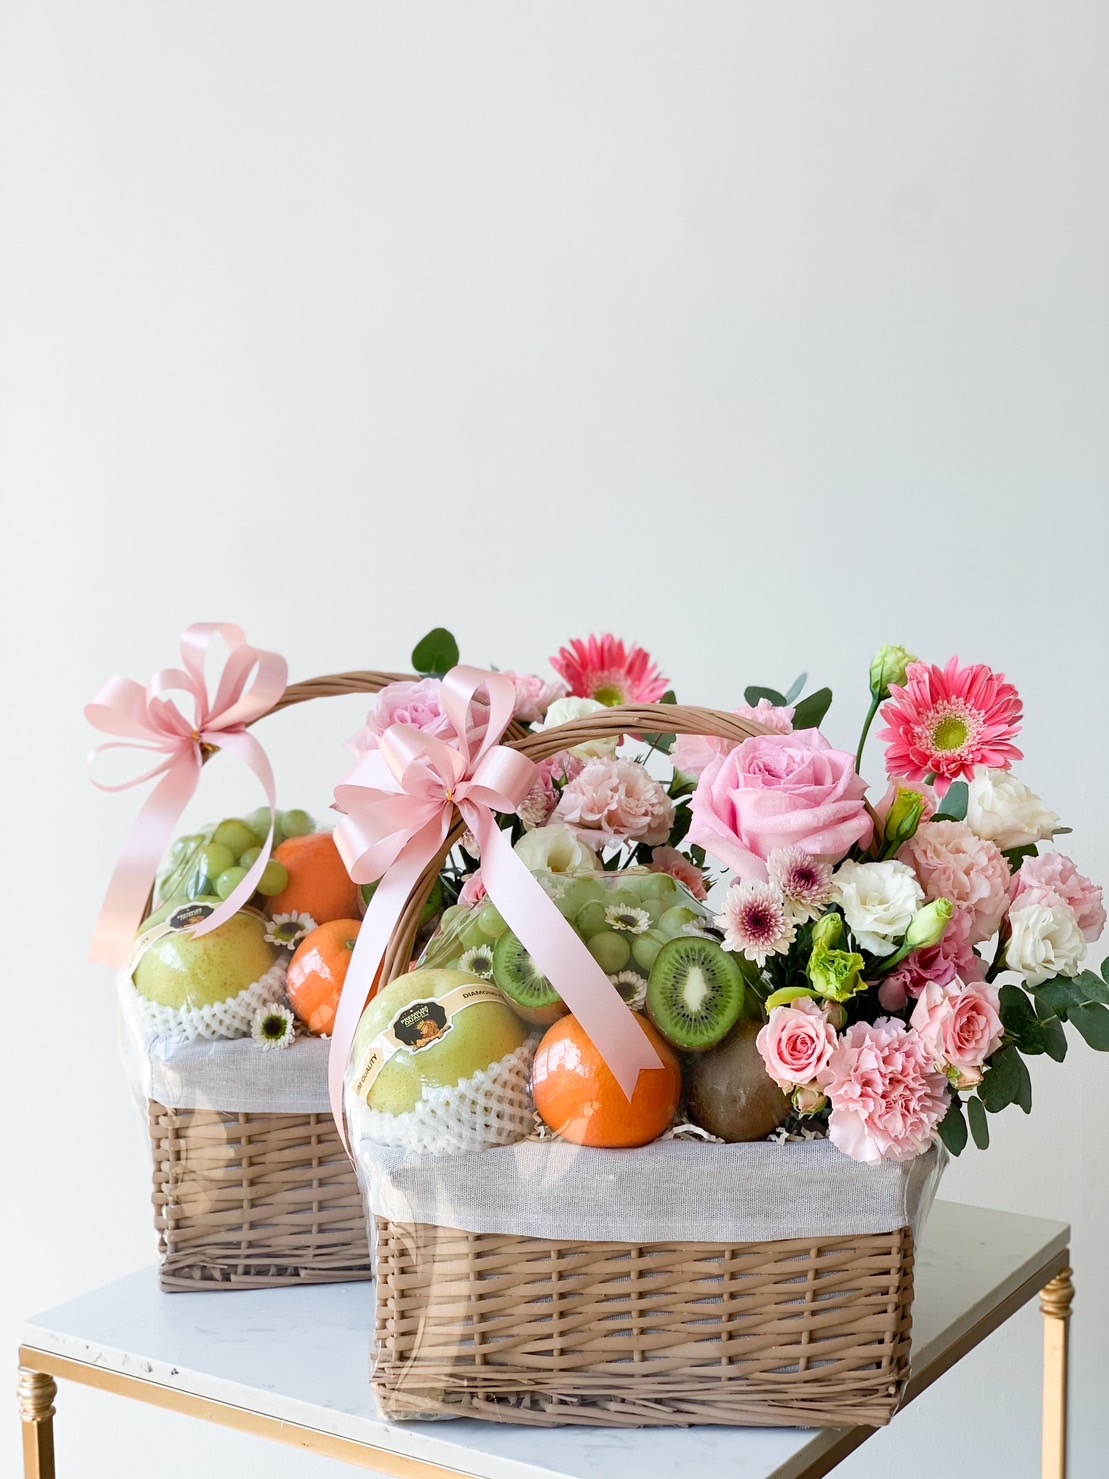 Fresh Fruits With Sweet Pink Flowers Gift In The Basket.